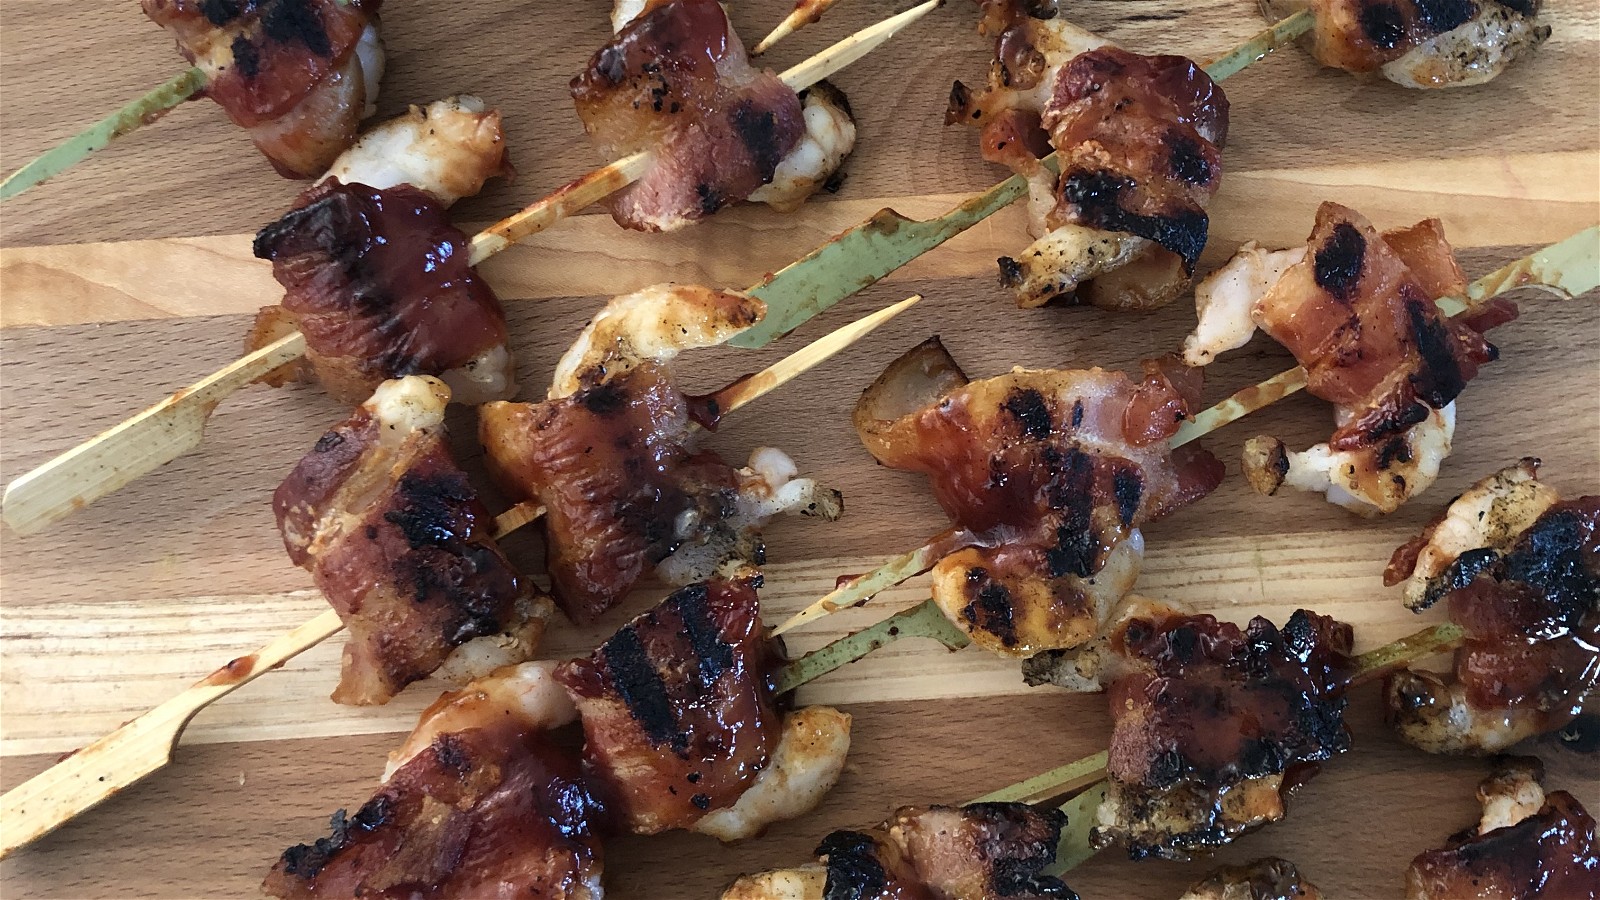 Image of Bacon Wrapped Shrimp Skewers with Chipotle Sauce